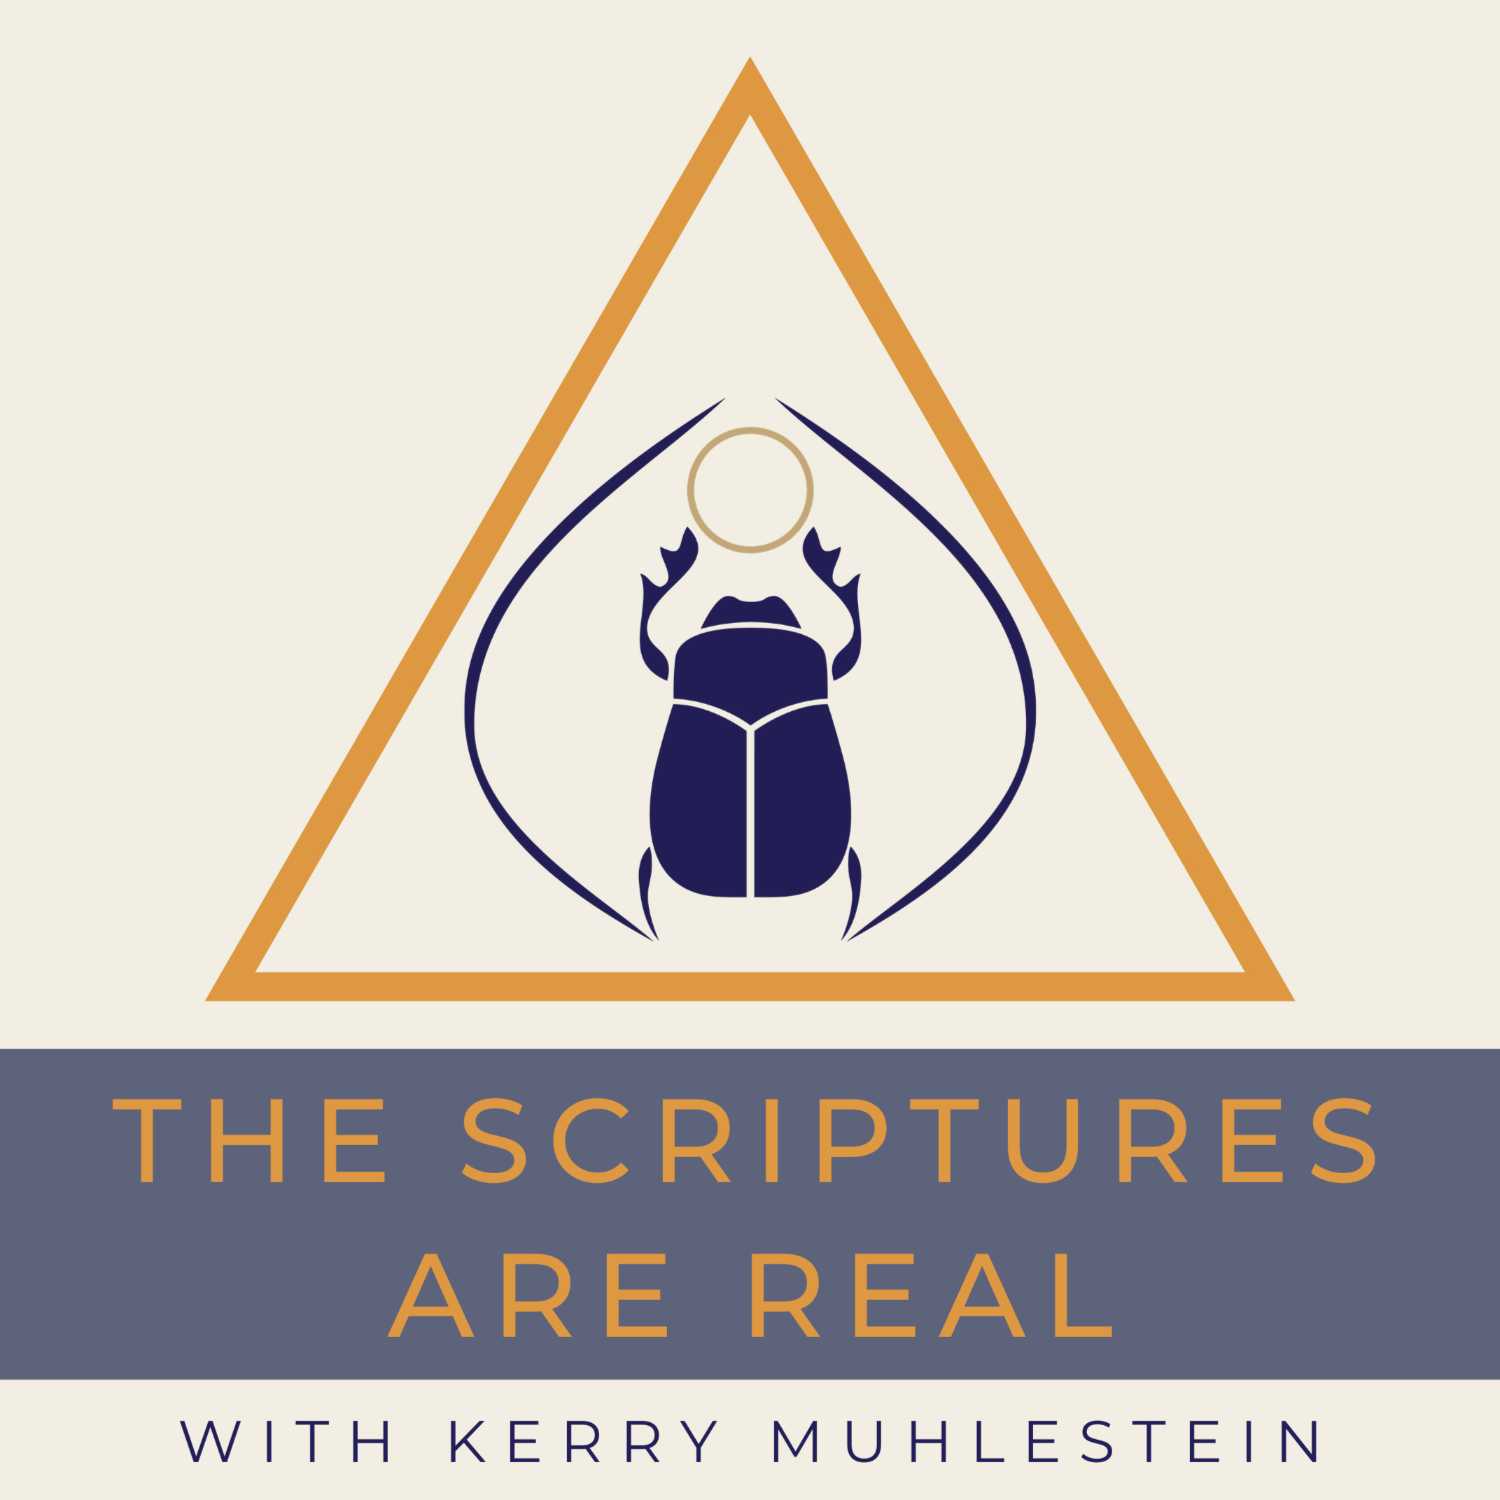 Shortcast on Capernaum and the Day of Miracles (week of March 6, third to listen to)